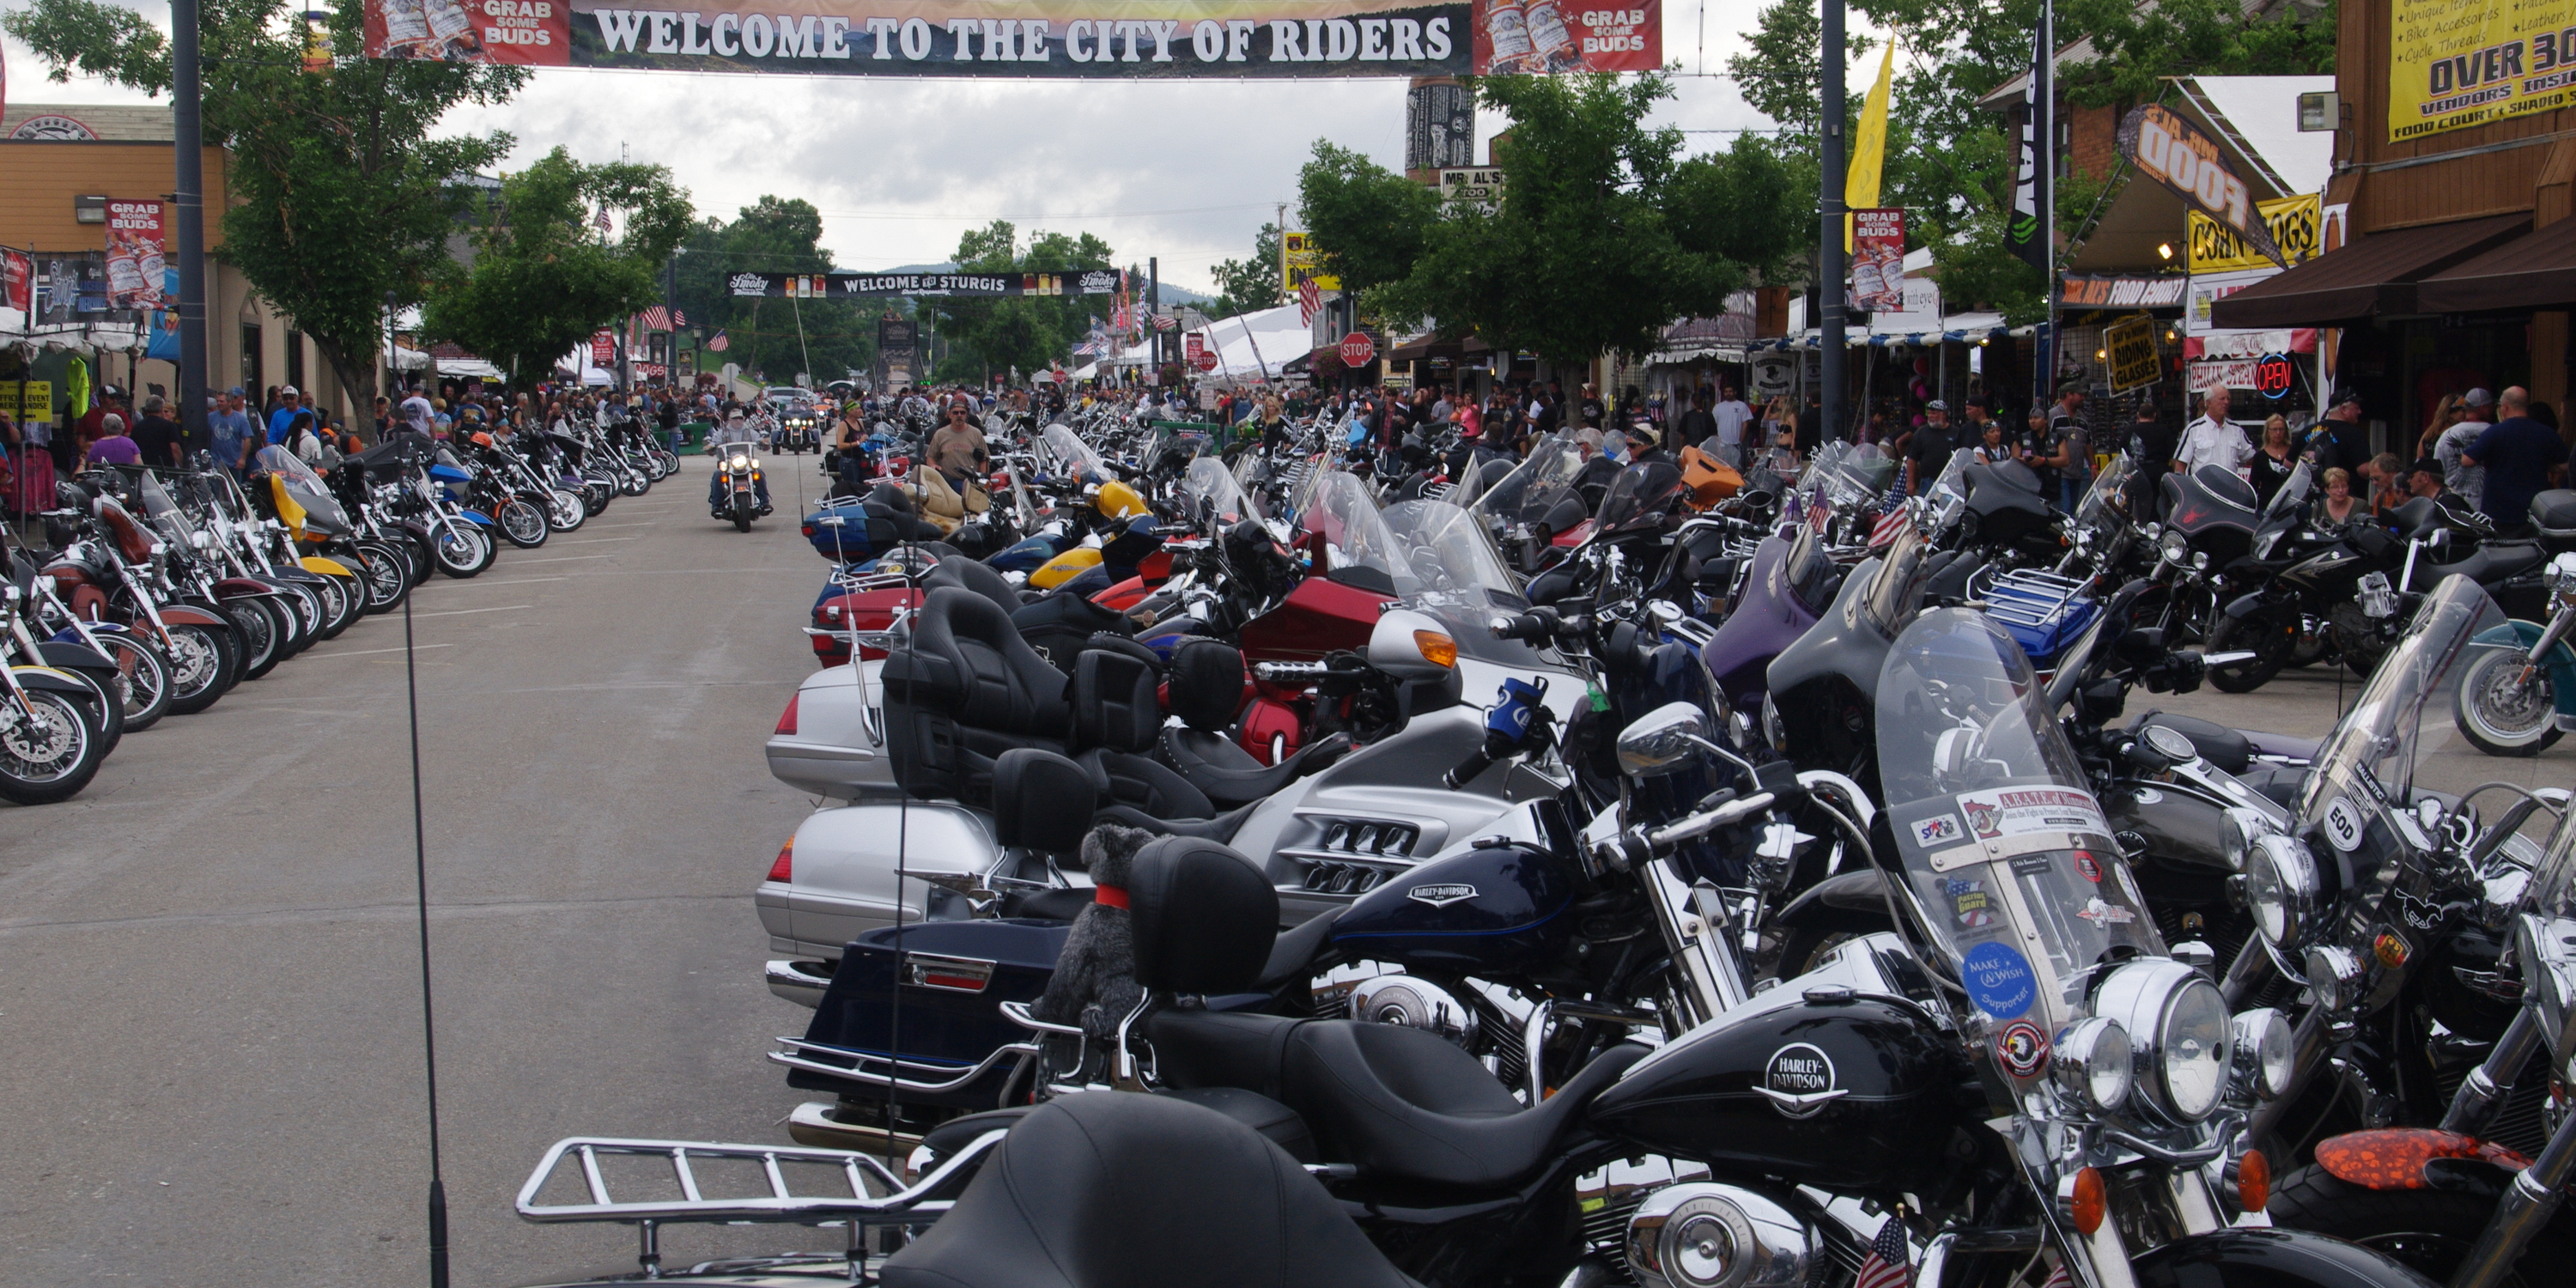 Motorcycles lined up on Main St in Sturgis, South Dakota, 2014.